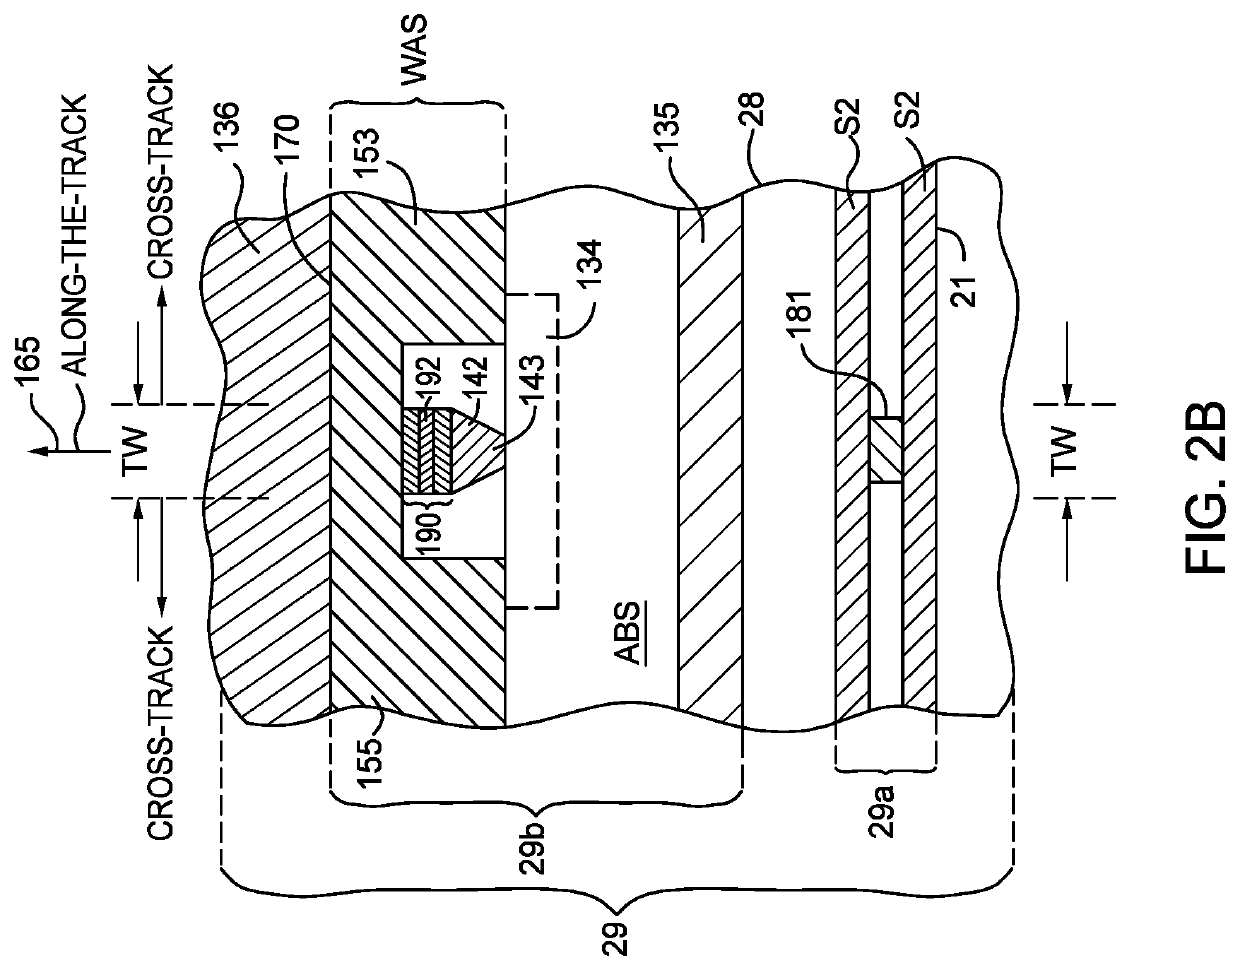 Spin transfer torque (STT) device with template layer for Heusler alloy magnetic layers